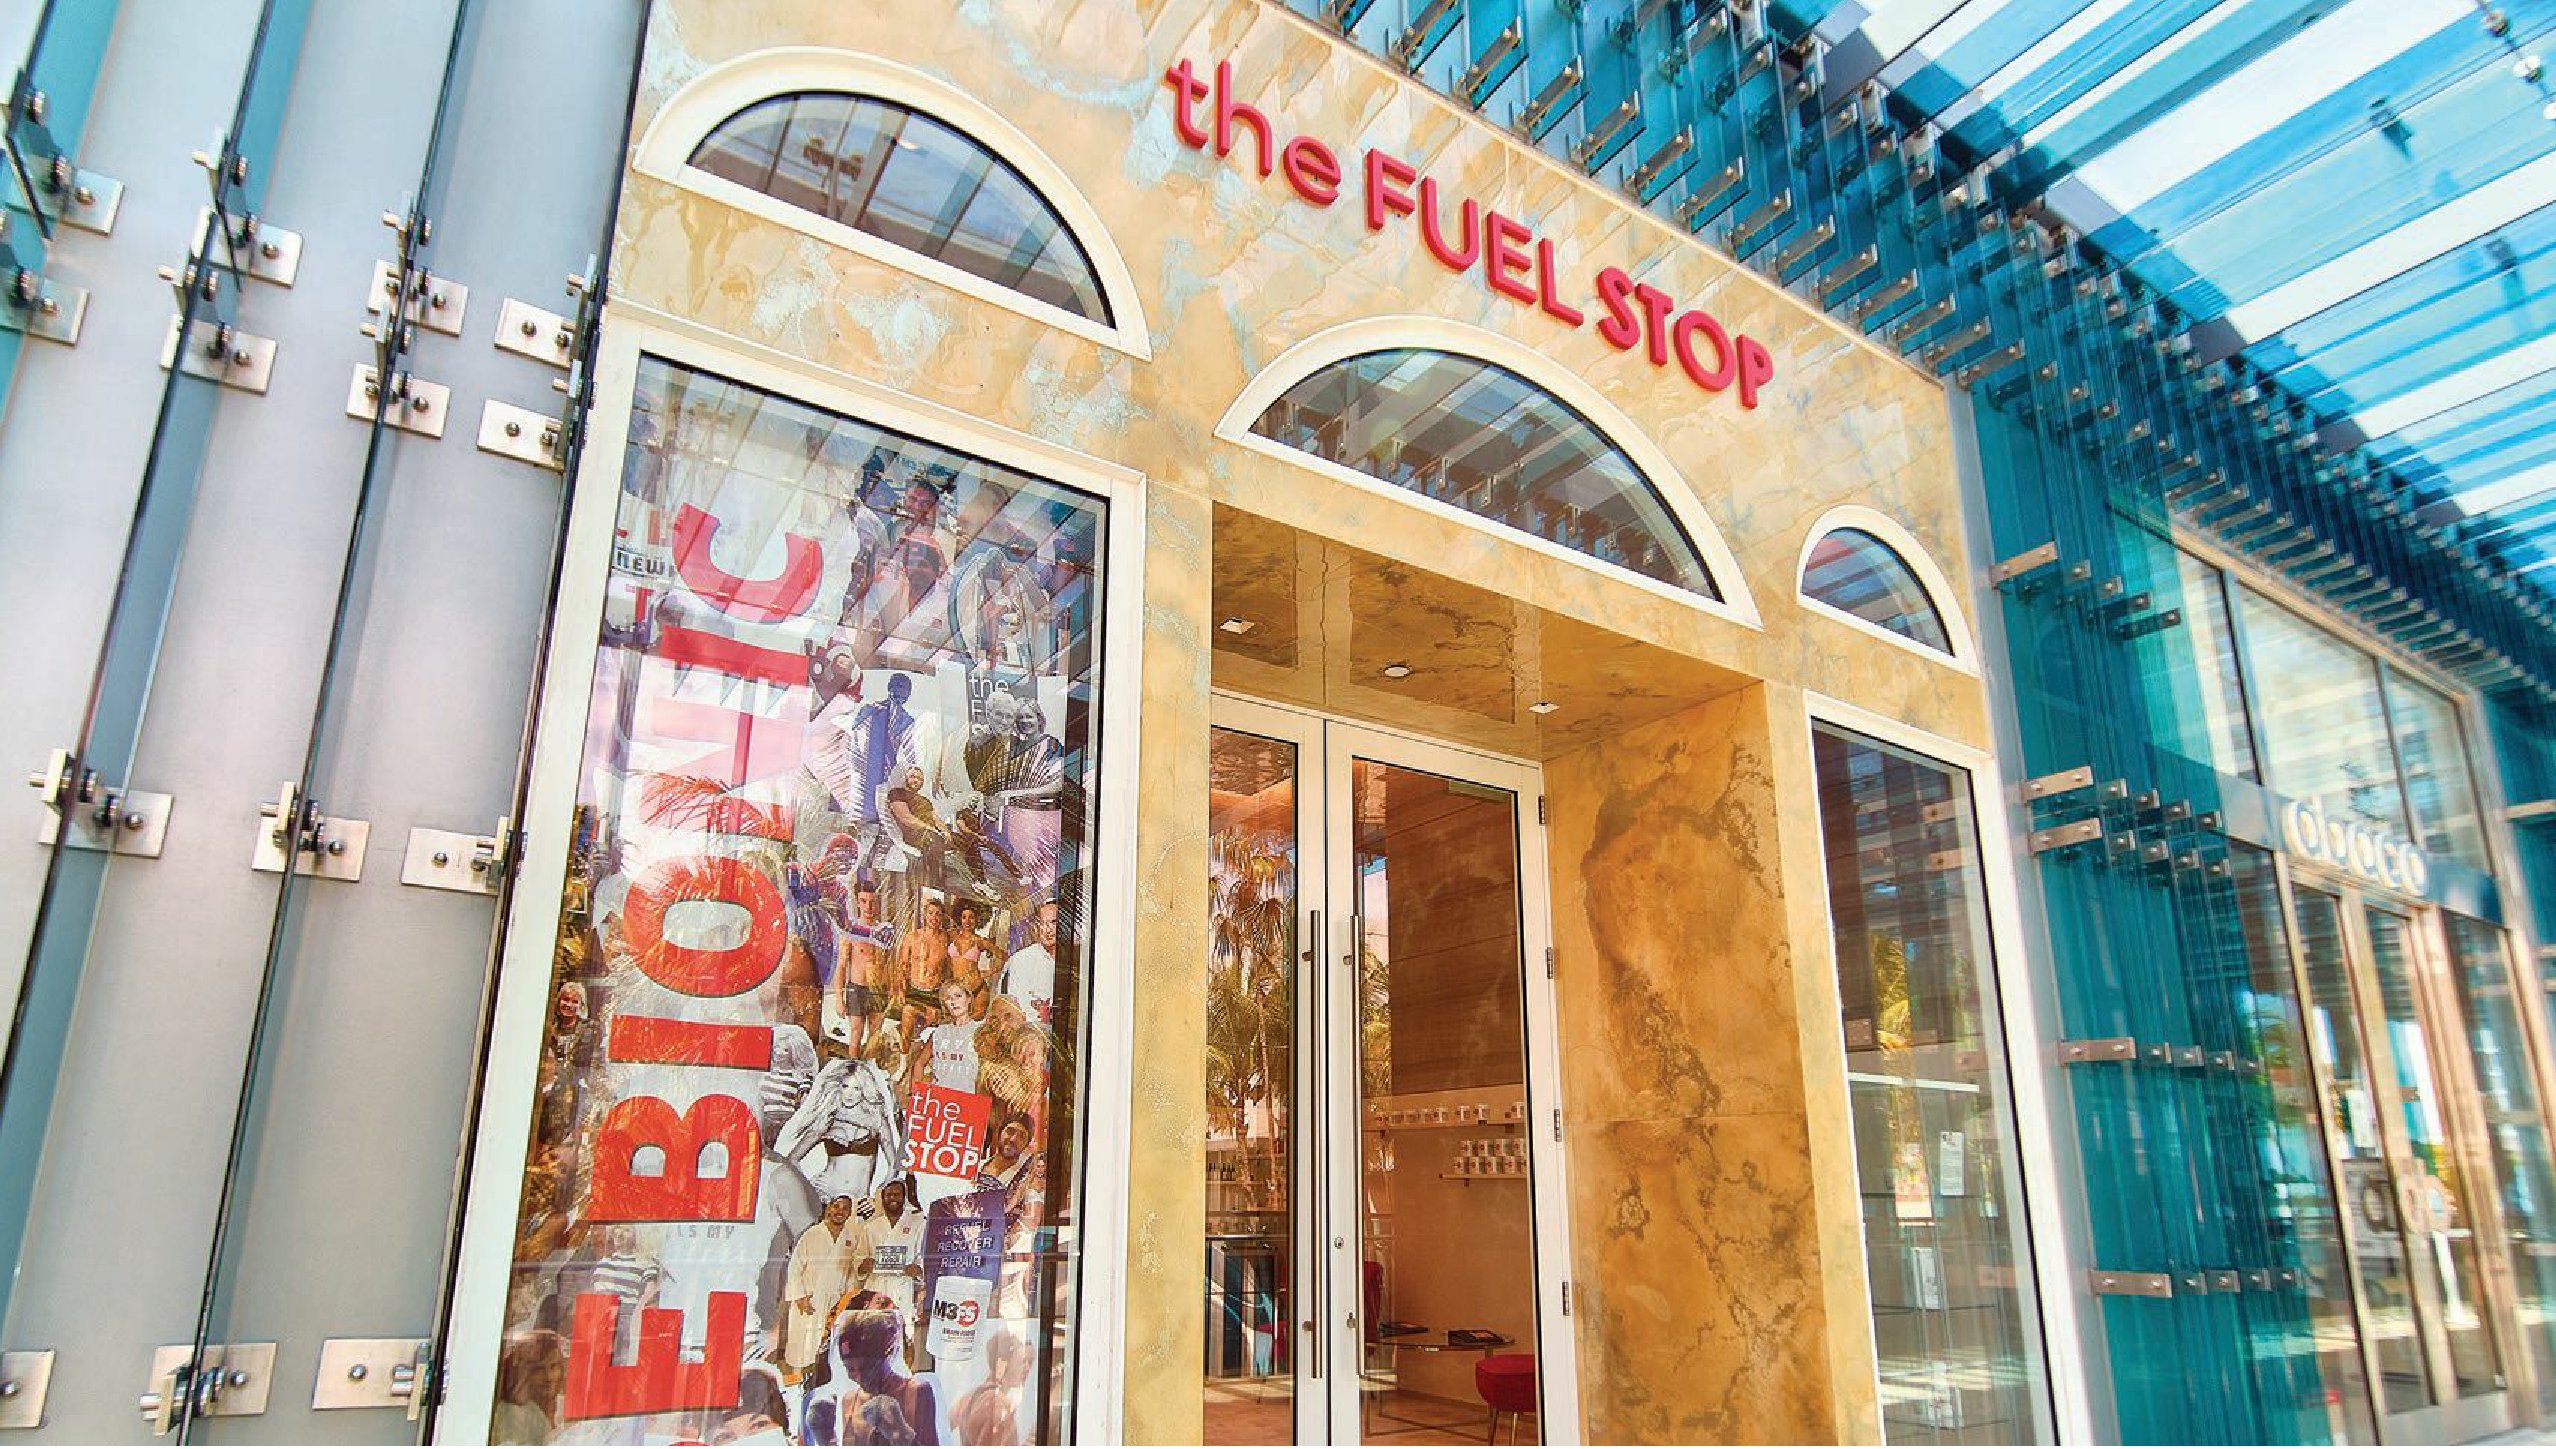 Exterior of The Fuel Stop in the Miami Design District PHOTO COURTESY OF THE FUEL STOP